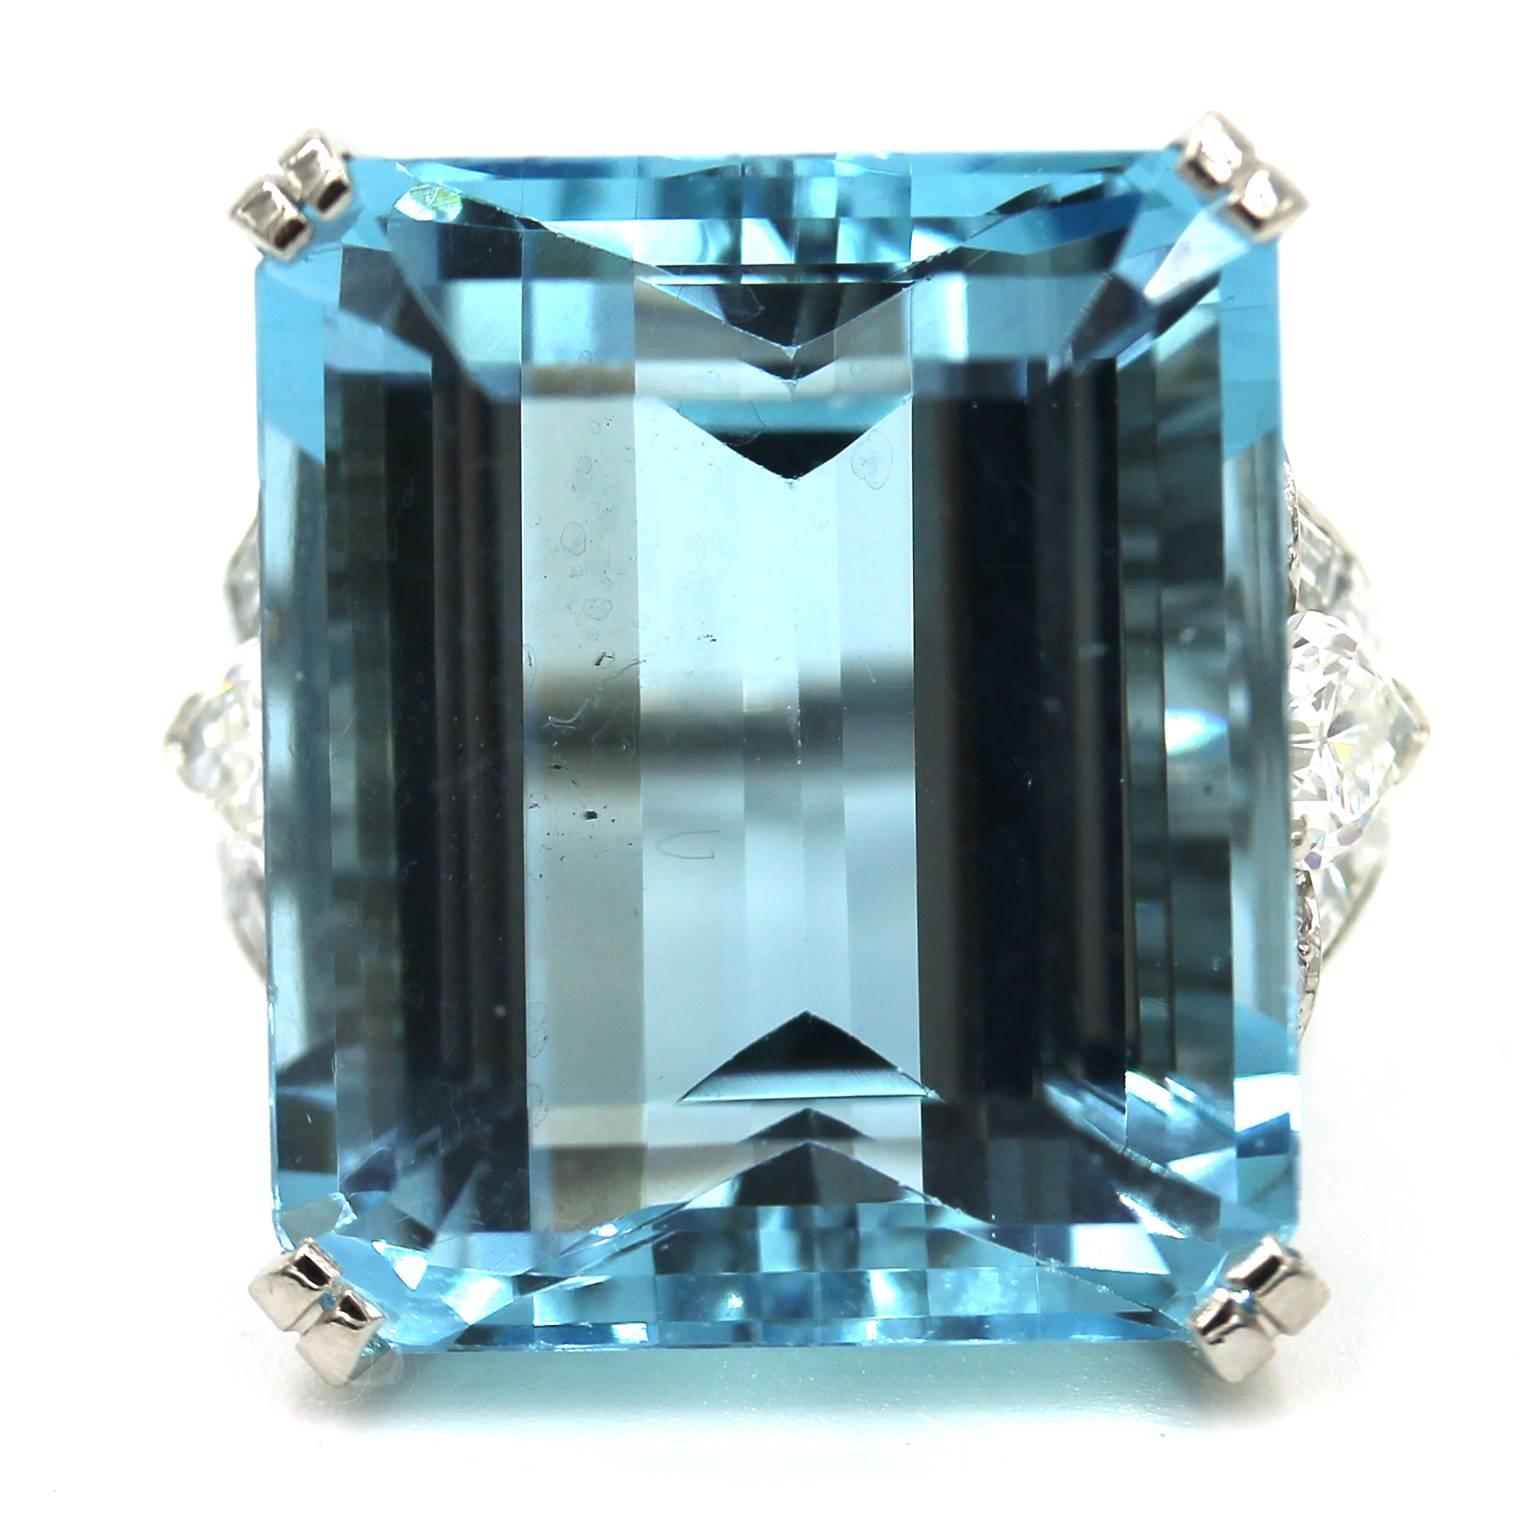 This fabulous estate ring features an emerald cut aquamarine and diamonds in a platinum setting. The aquamarine measures 21mm x 18mm by 12.3 mm deep, and weighs approximately 32.50 carats. 
There are 2 pear shaped brilliant cut diamonds, 16 single